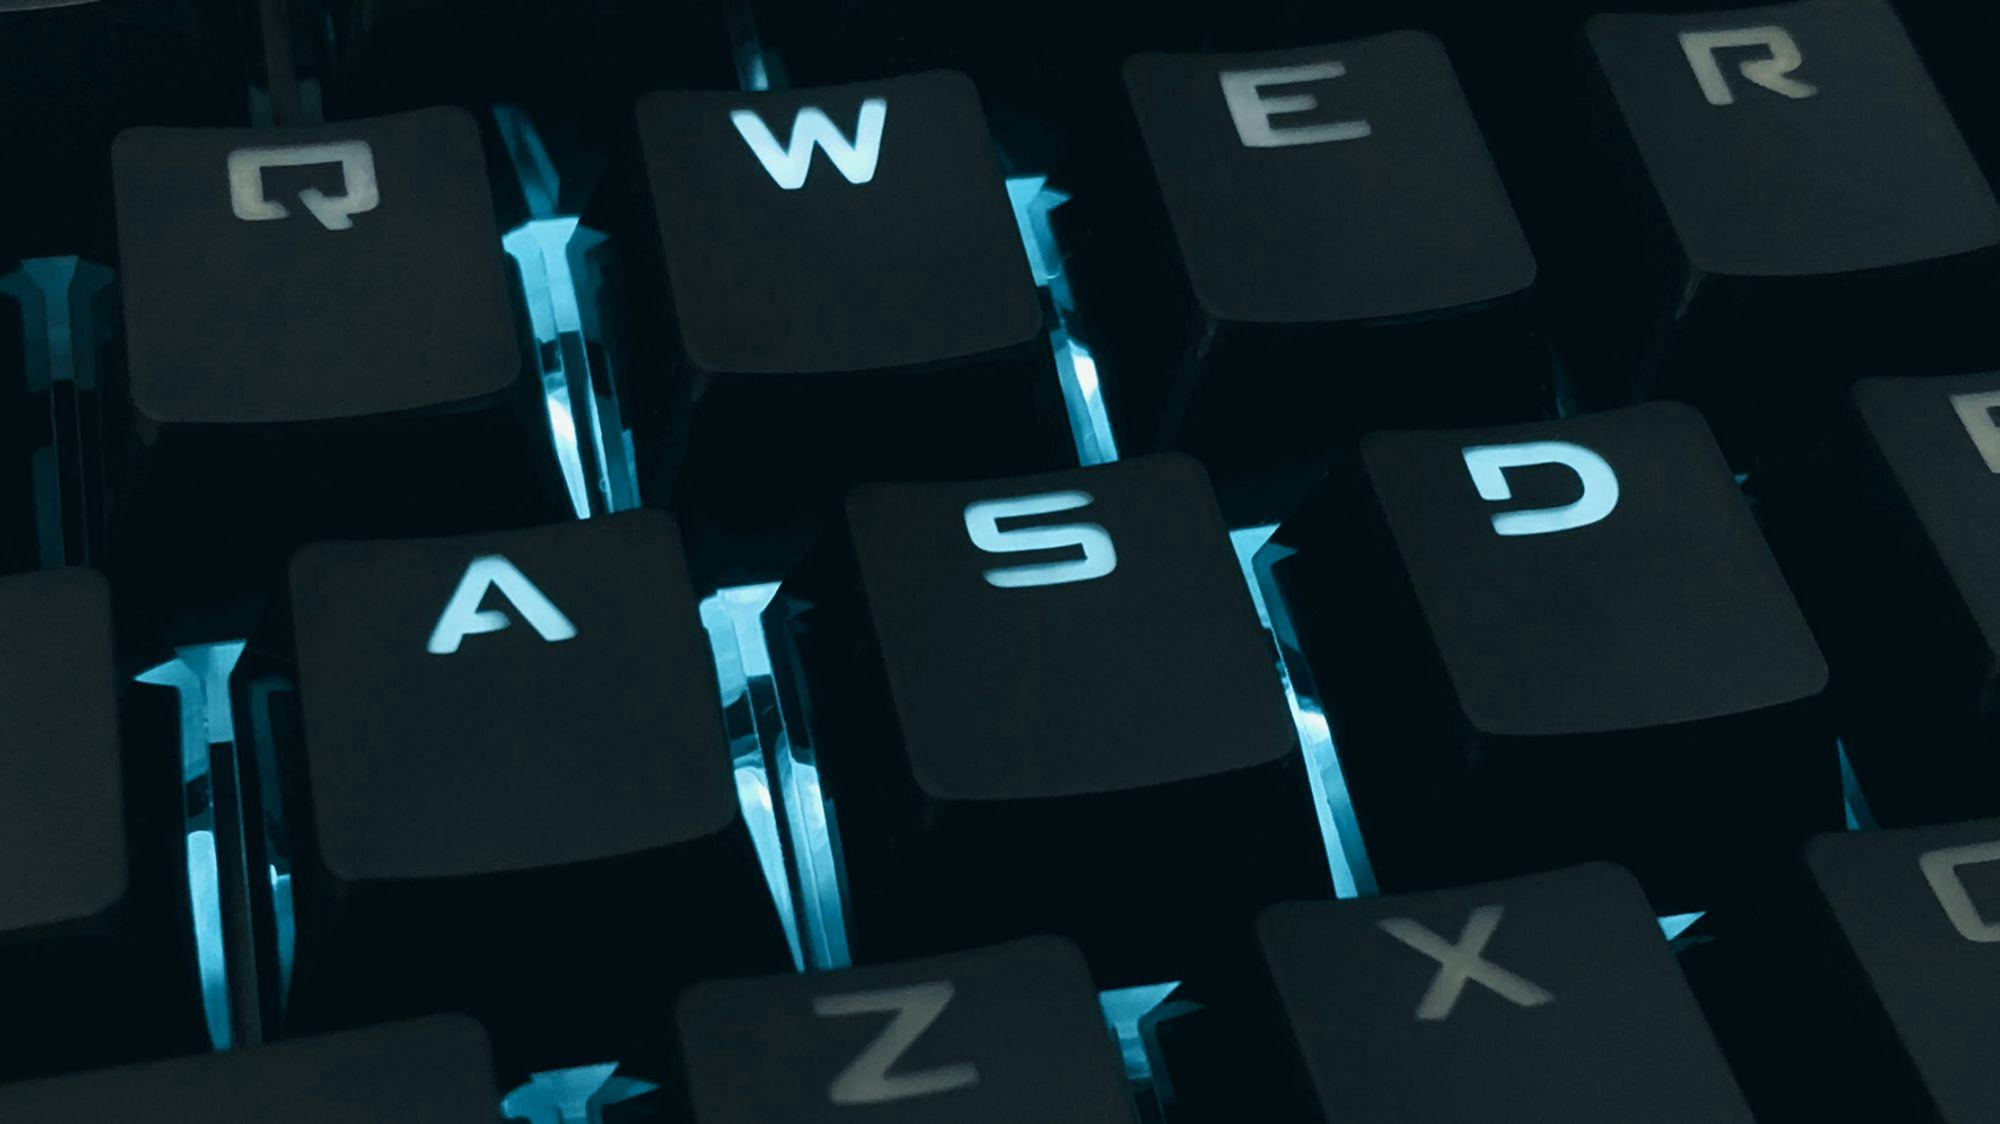 A black computer keypboard with blue lid up letters, you can se A-S-D and W 